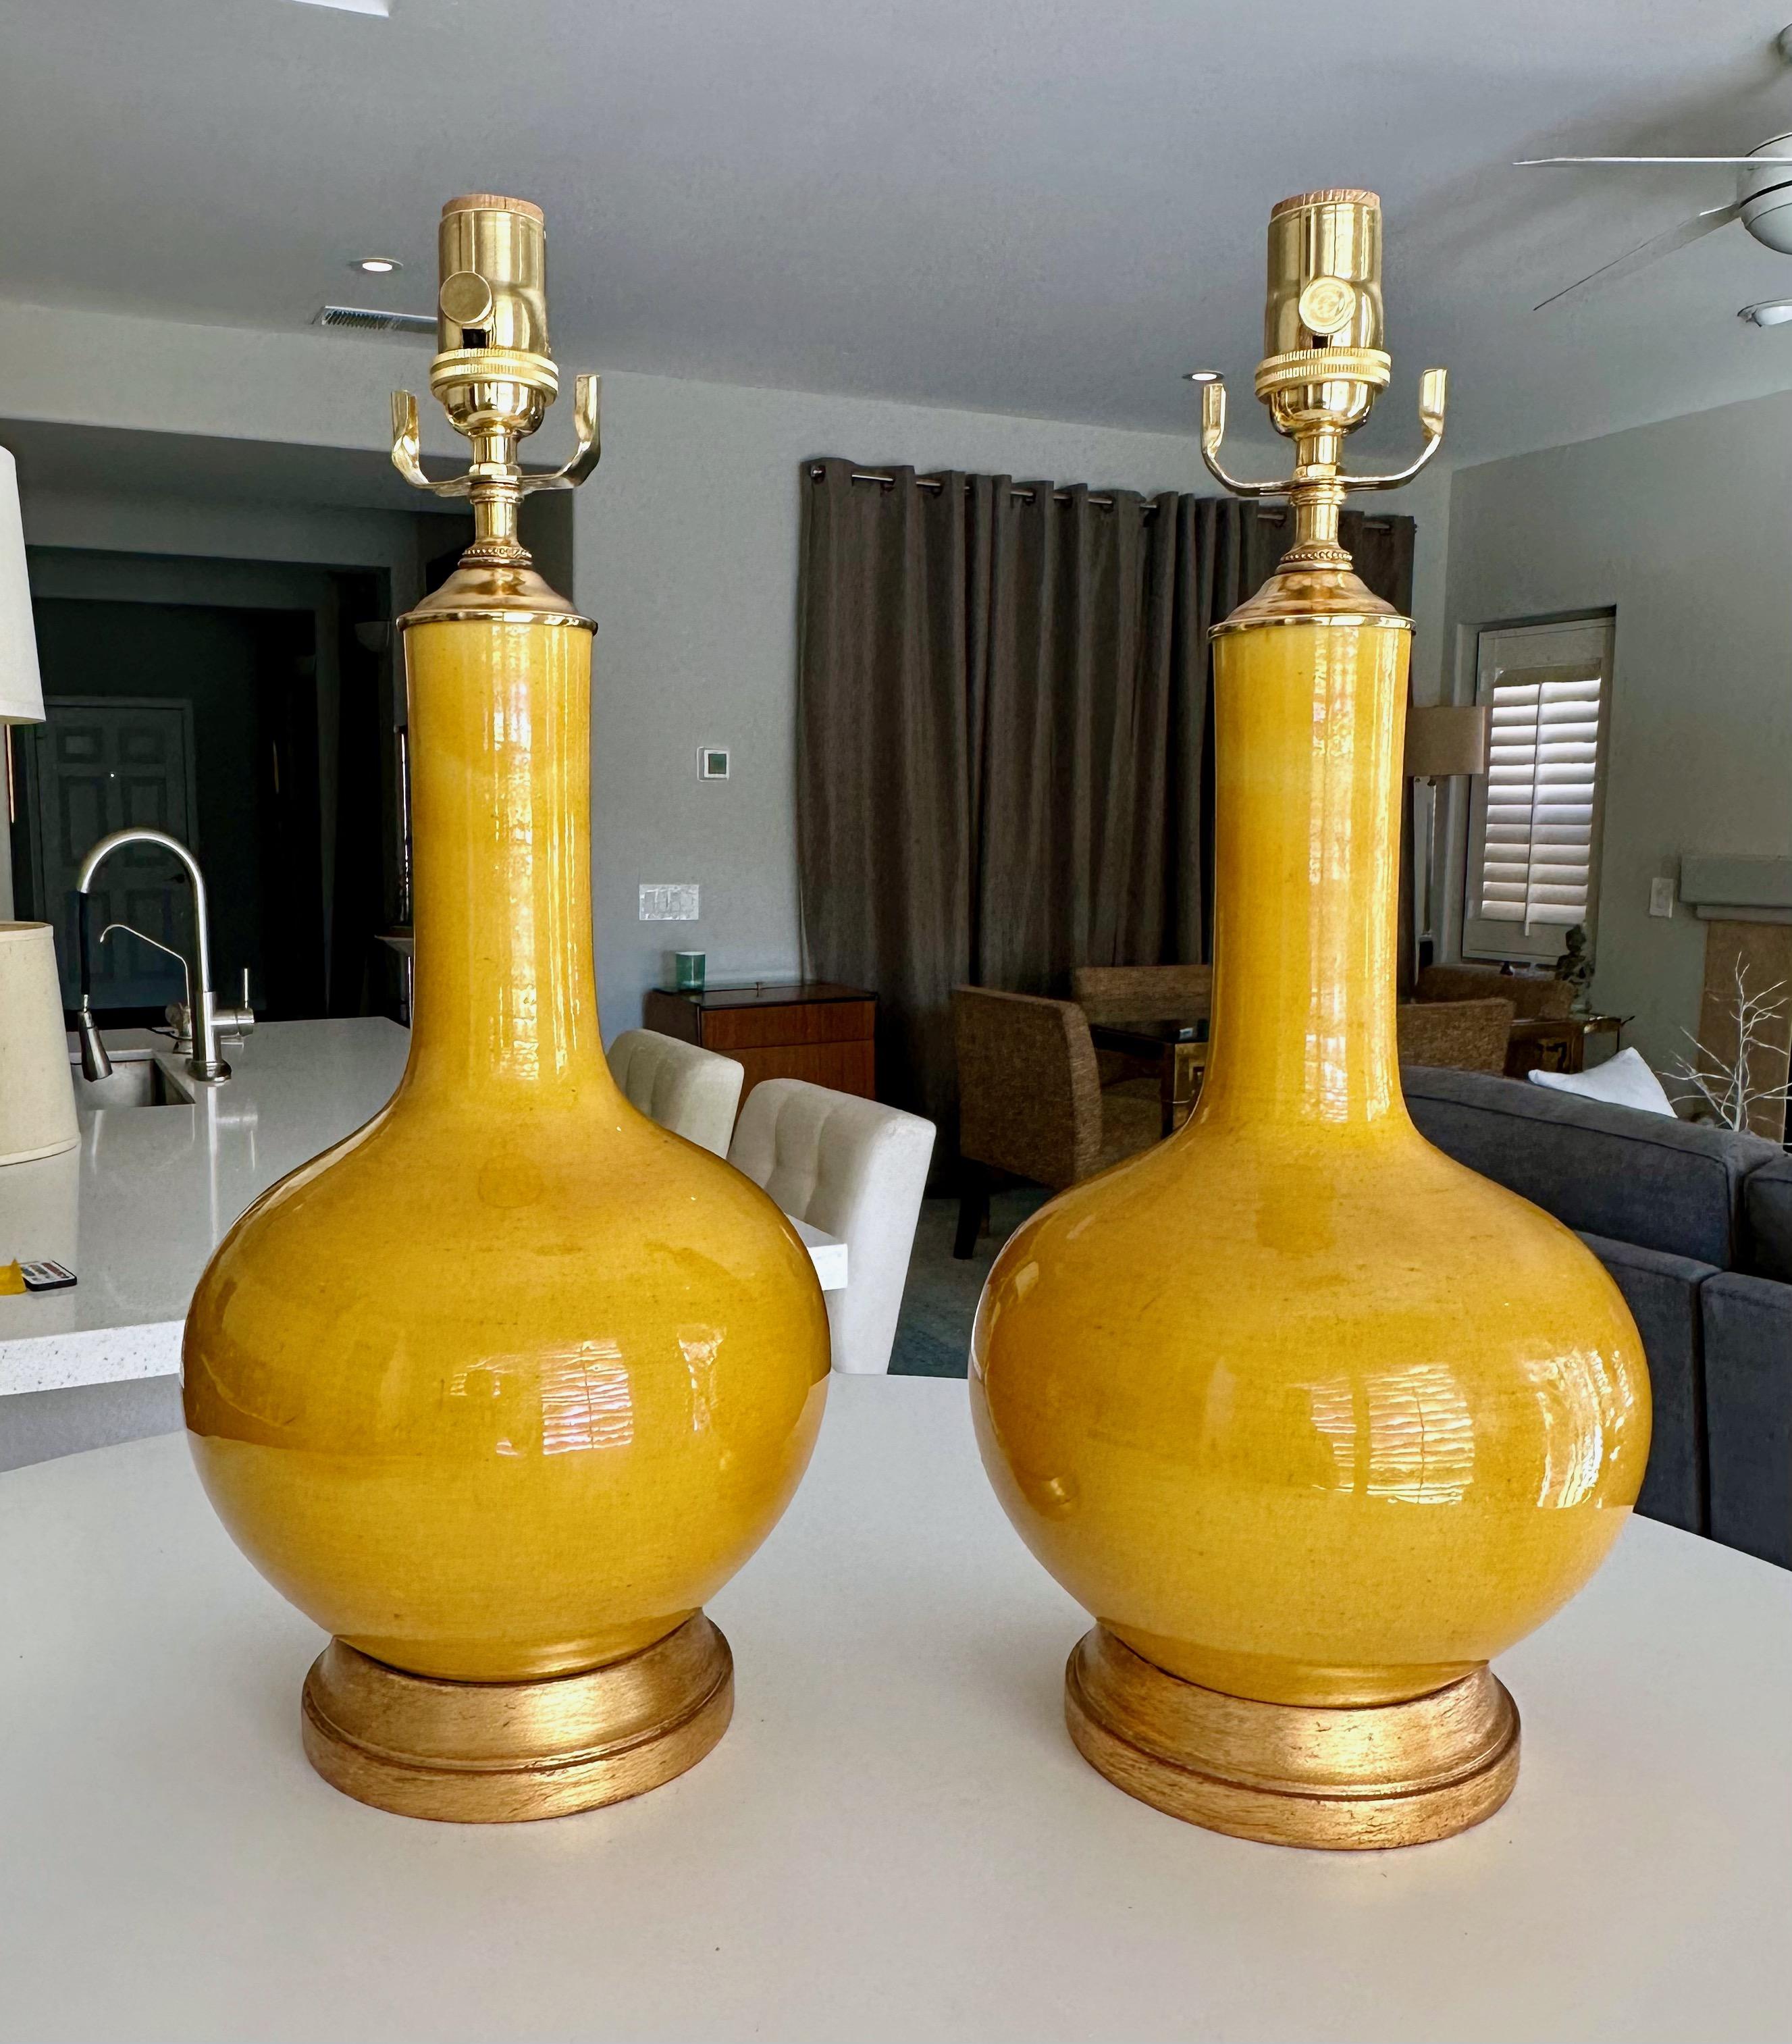 Pair of Asian style bright yellow glaze porcelain table lamps. Each mounted on gilt turned wood lamp bases. Newly wired with brass 3 way sockets. Porcelain vase portion is 13.5